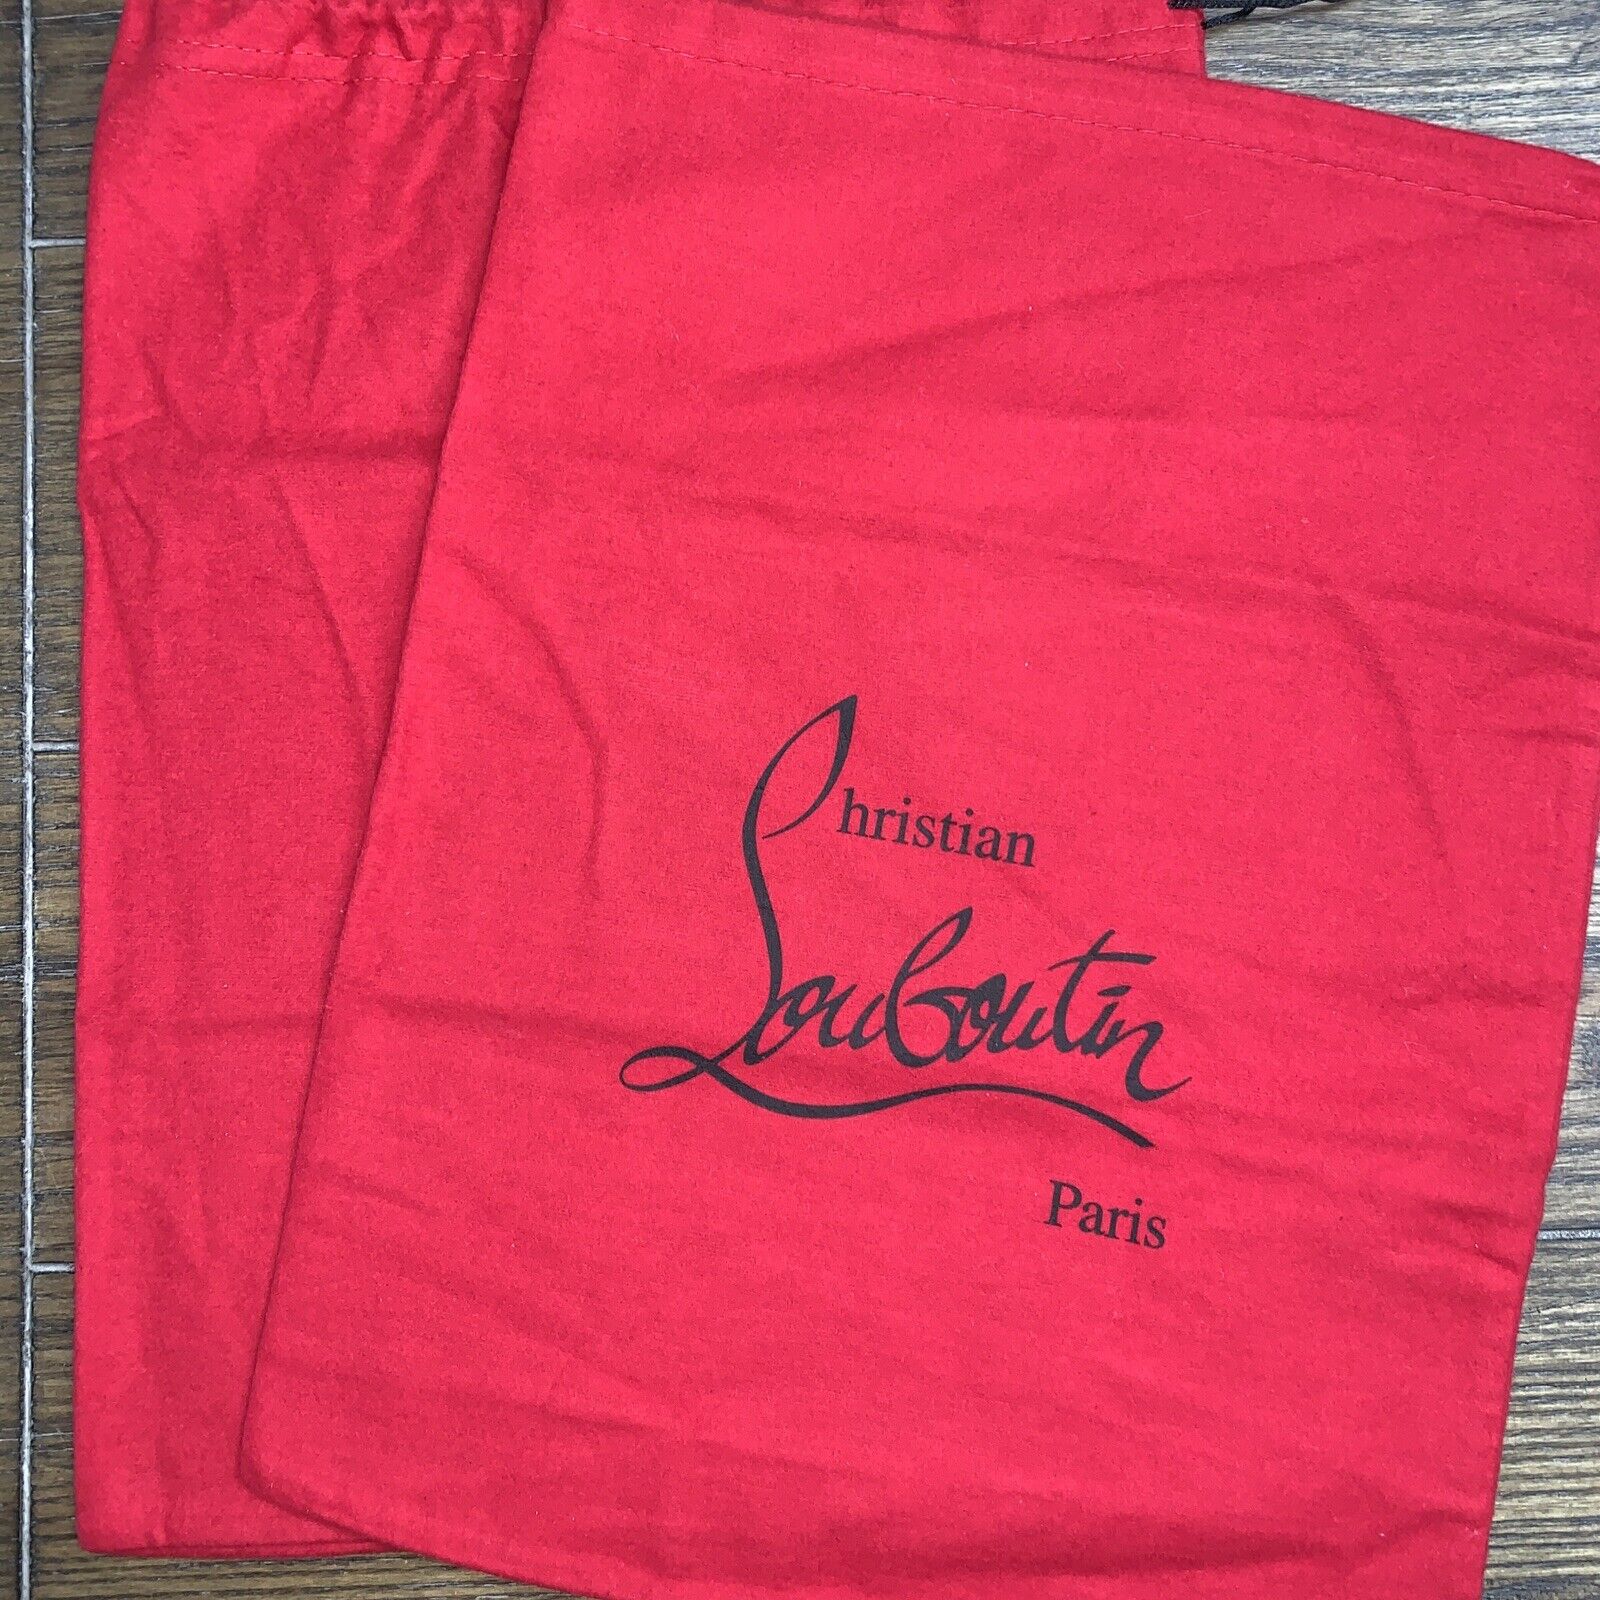 New Christian Louboutin Red Booty Shoe Dust Bag 11.5”x15” Set Of 2